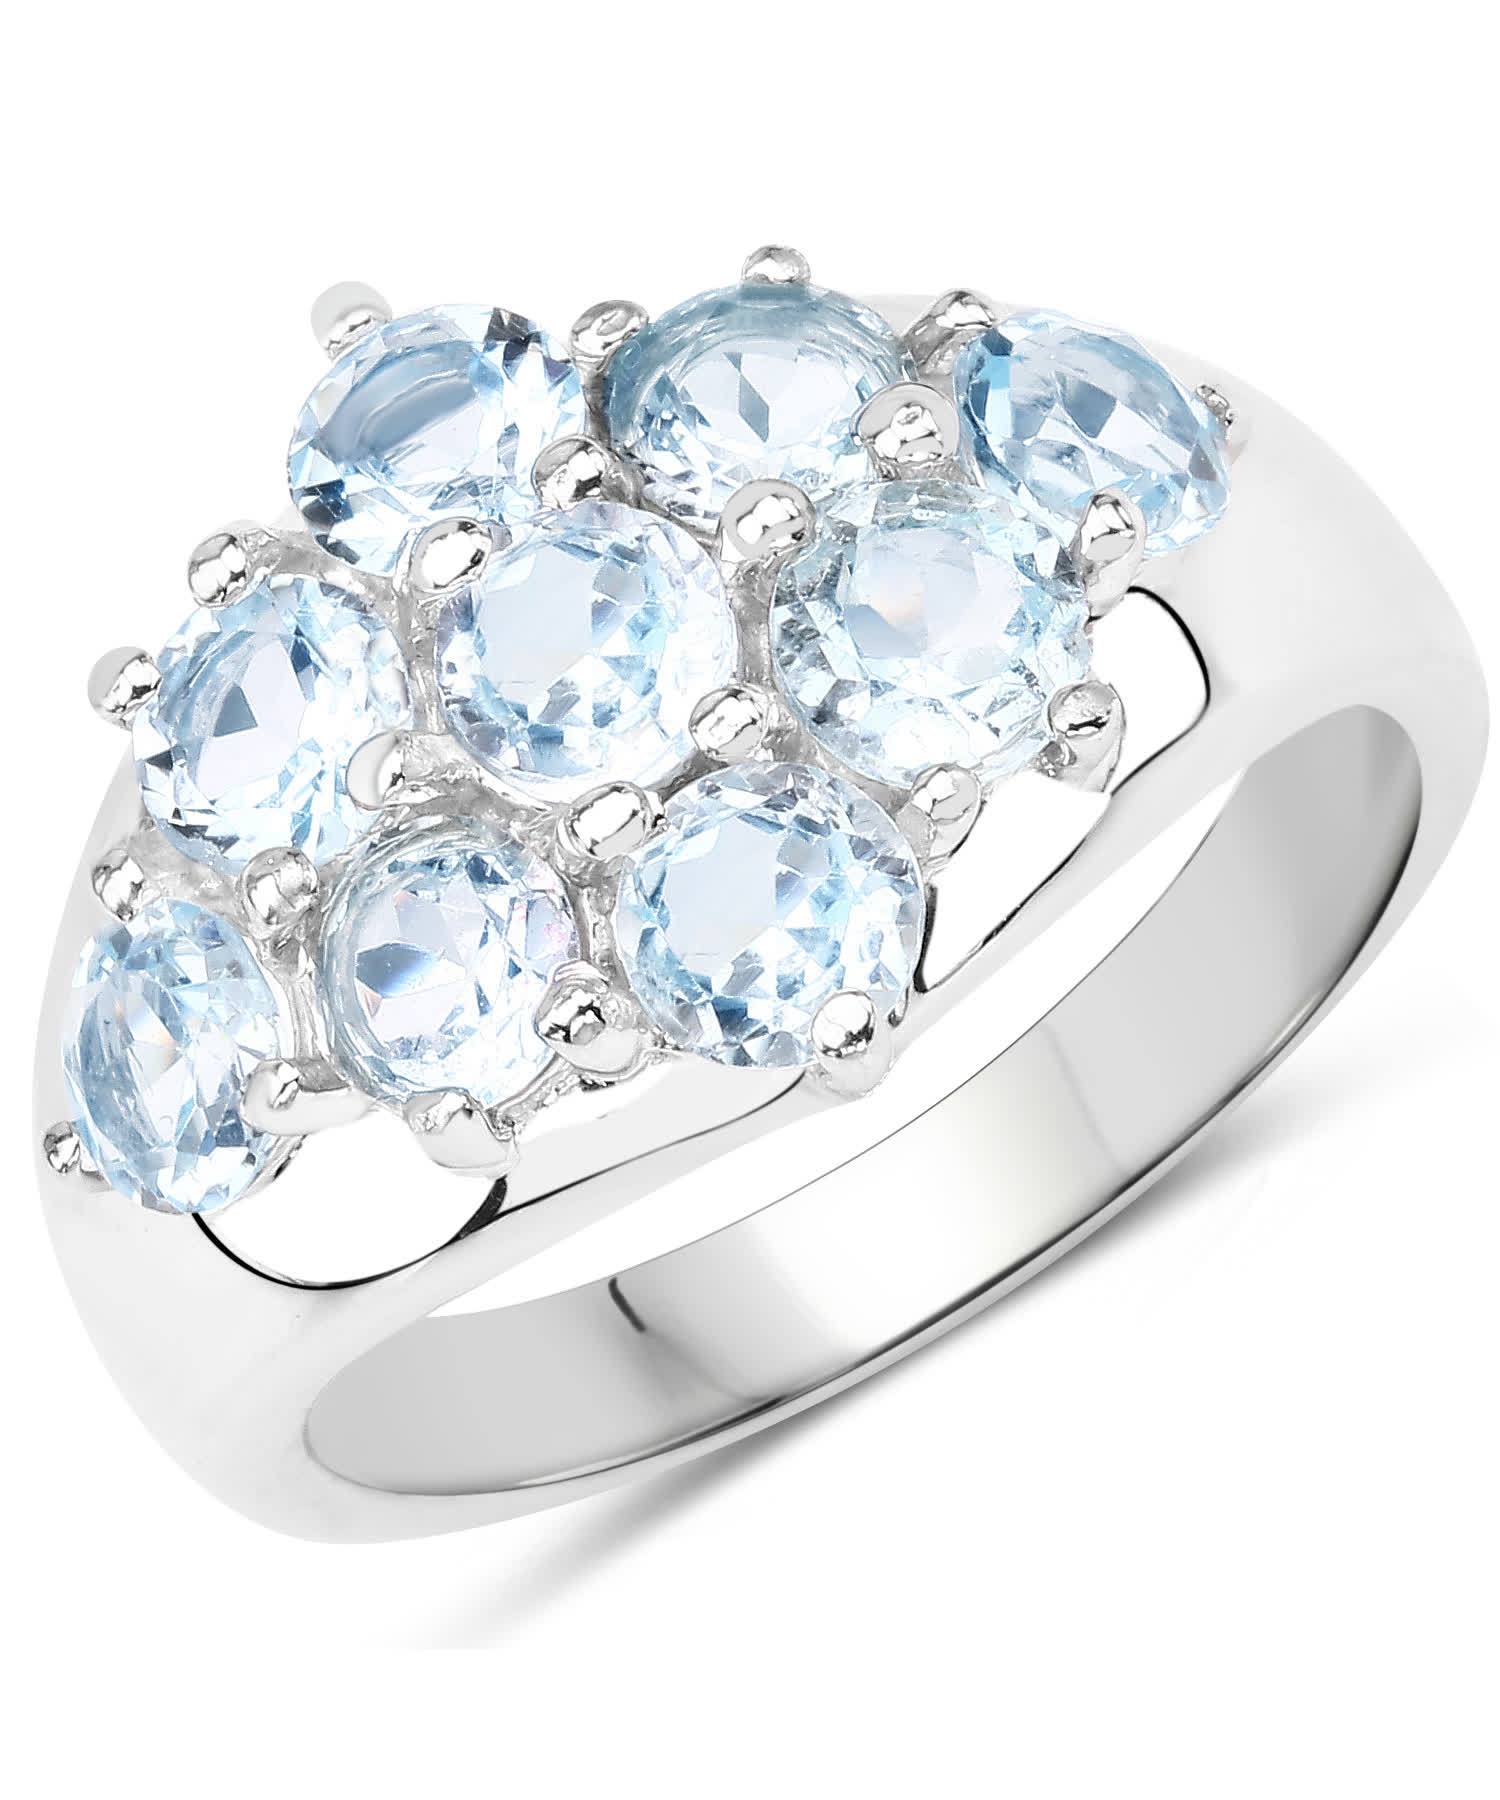 2.88ctw Natural Sky Blue Topaz Rhodium Plated 925 Sterling Silver Right Hand Ring View 1